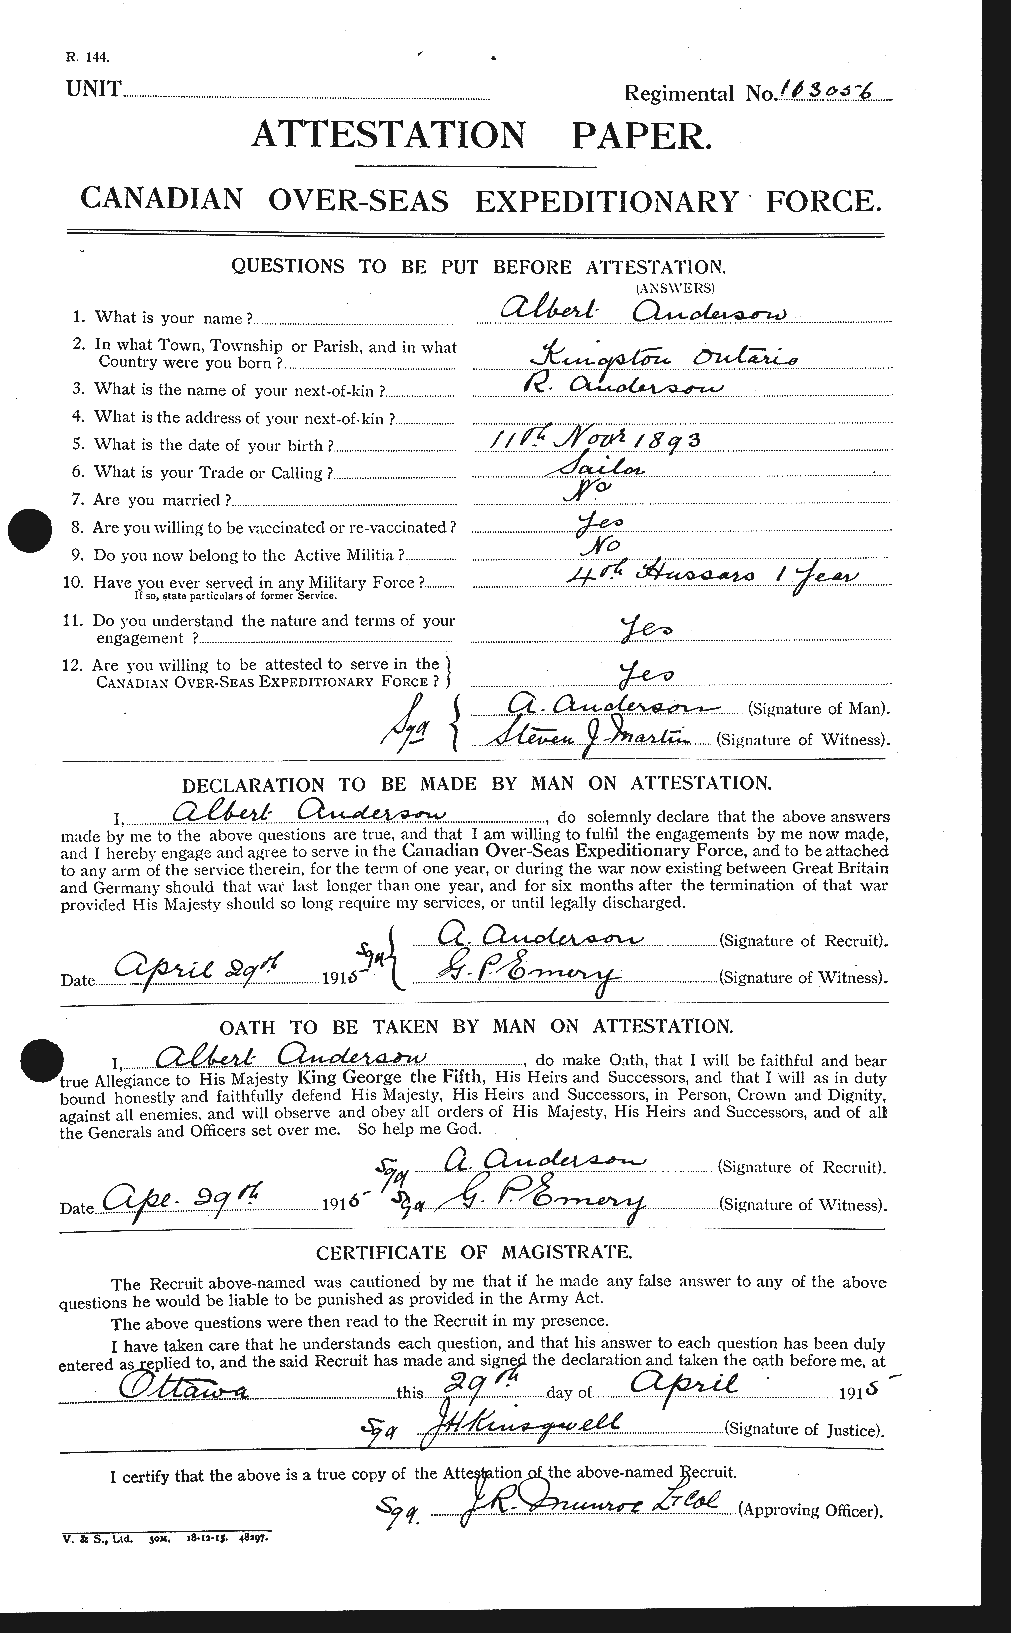 Personnel Records of the First World War - CEF 209556a